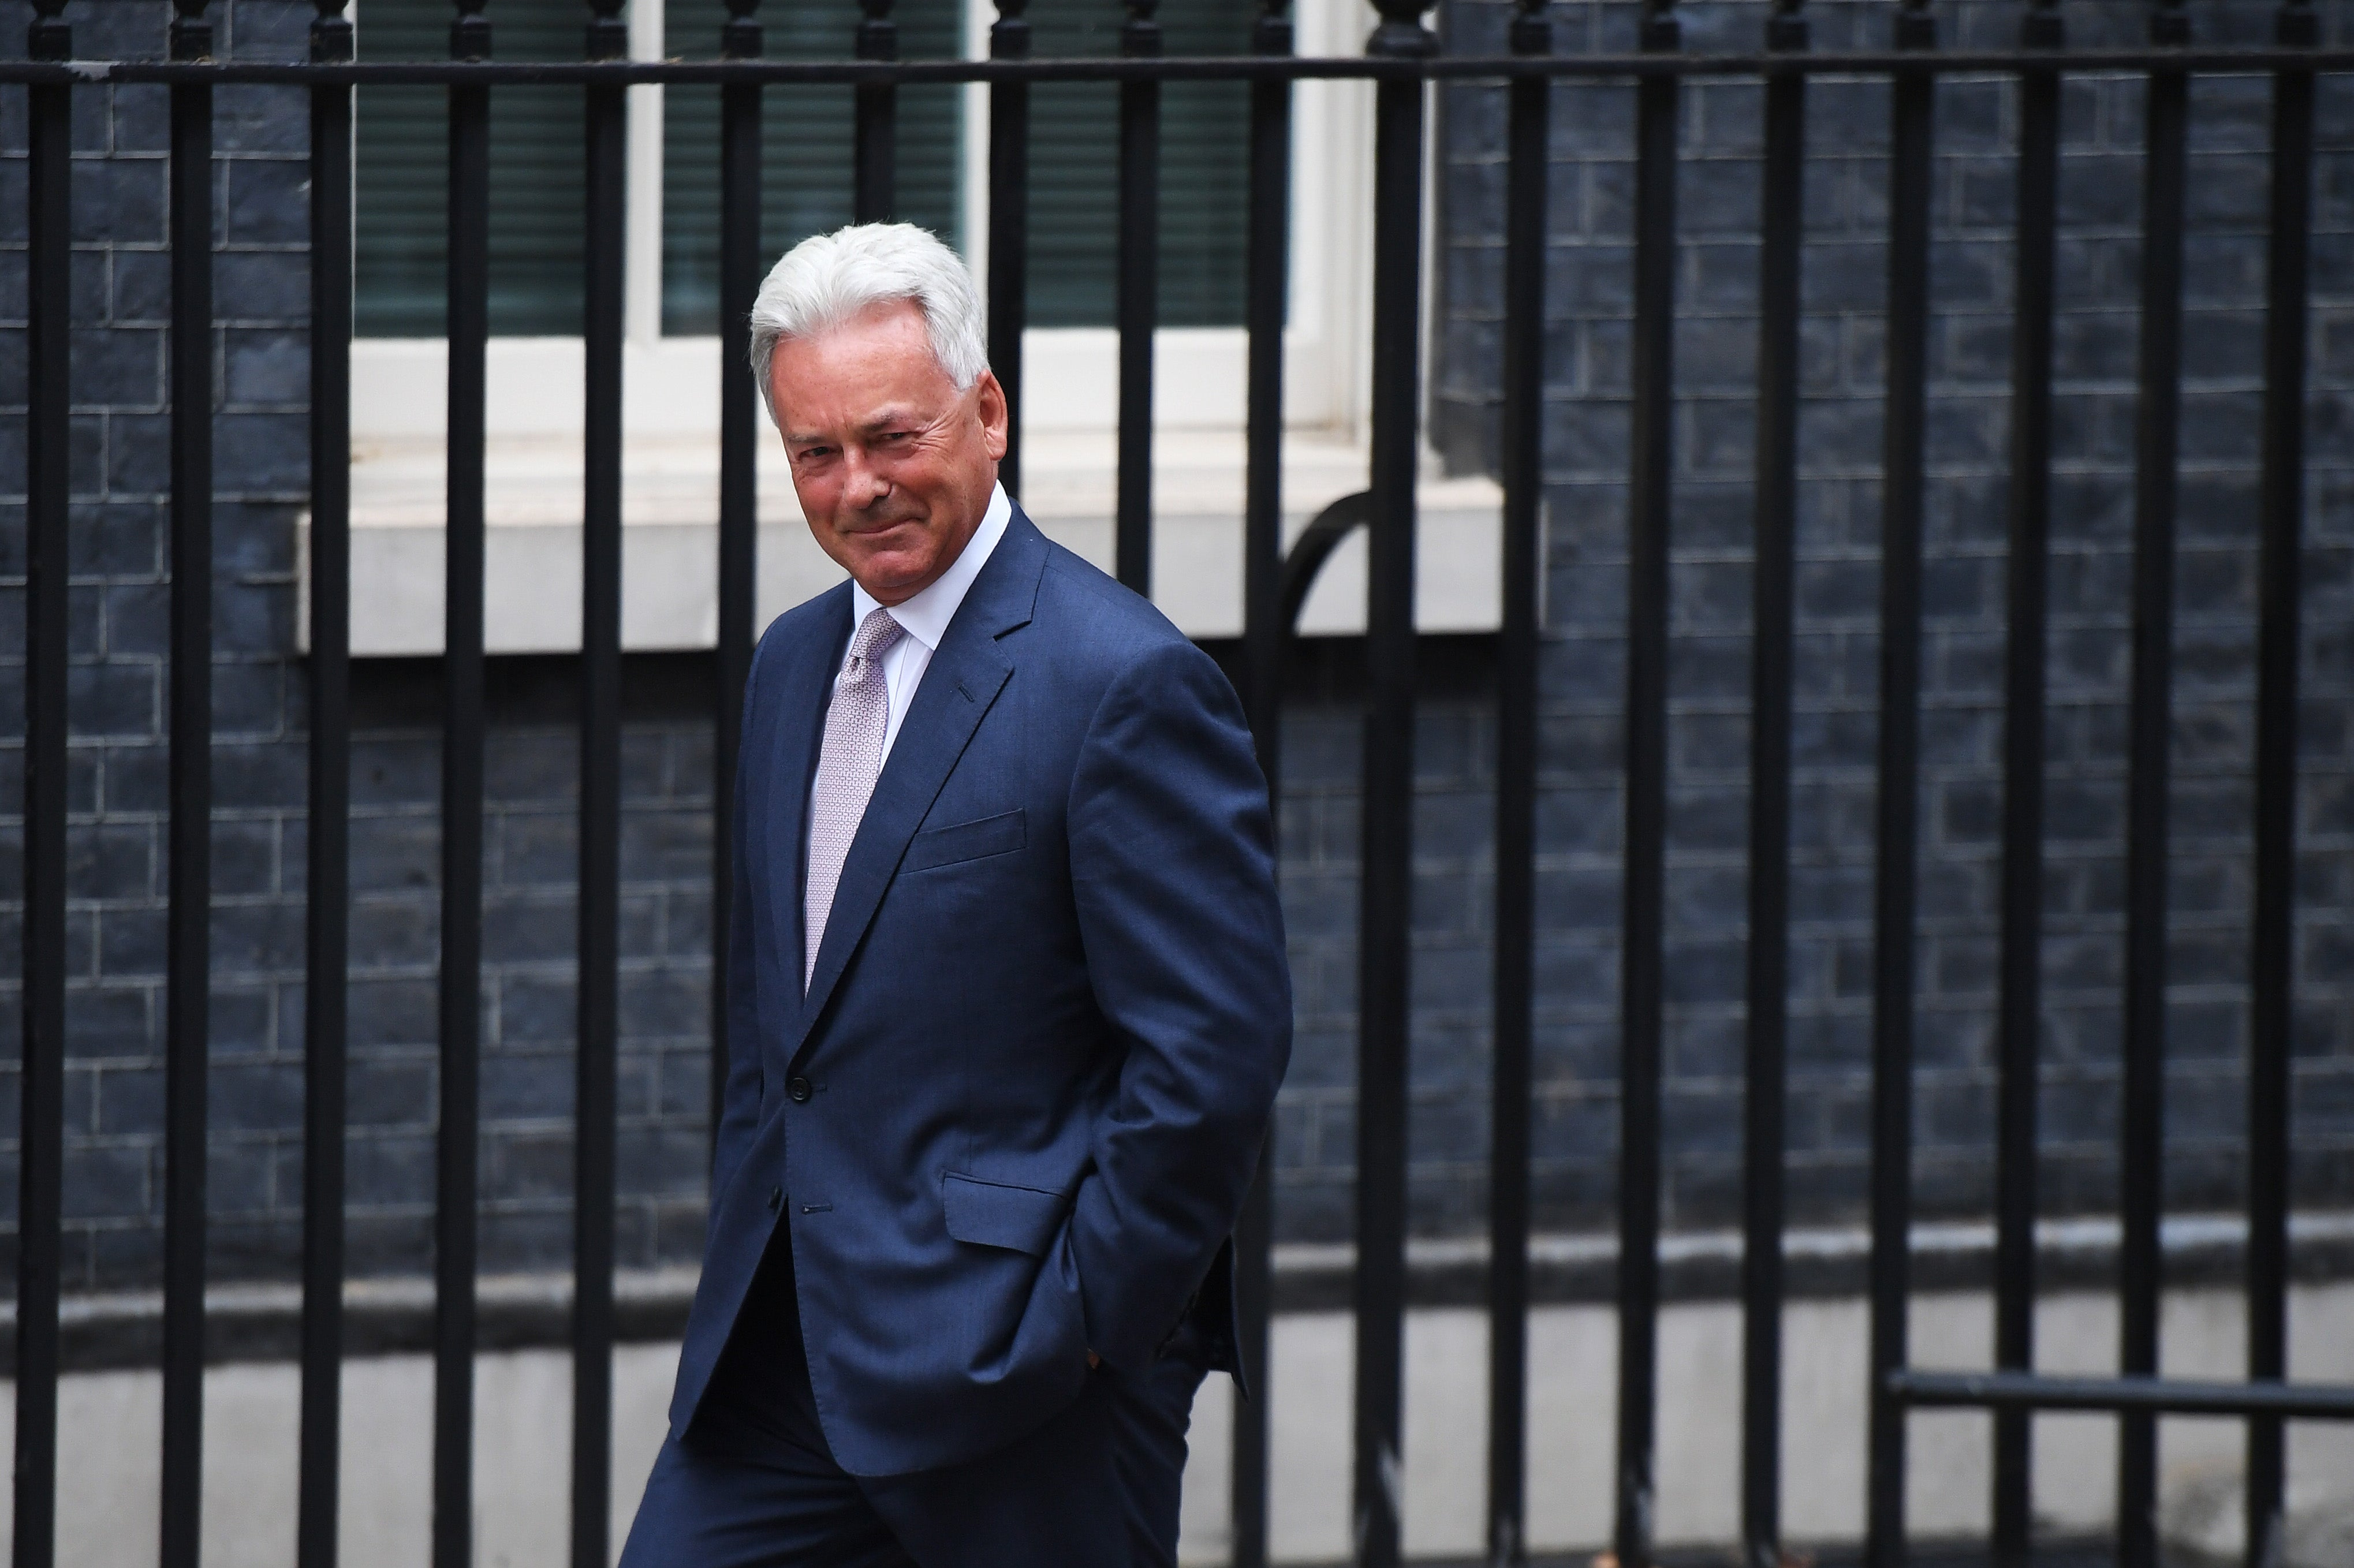 Sir Alan Duncan said Israel has ‘lost the support of the world’ through its ‘deceit and callousness’